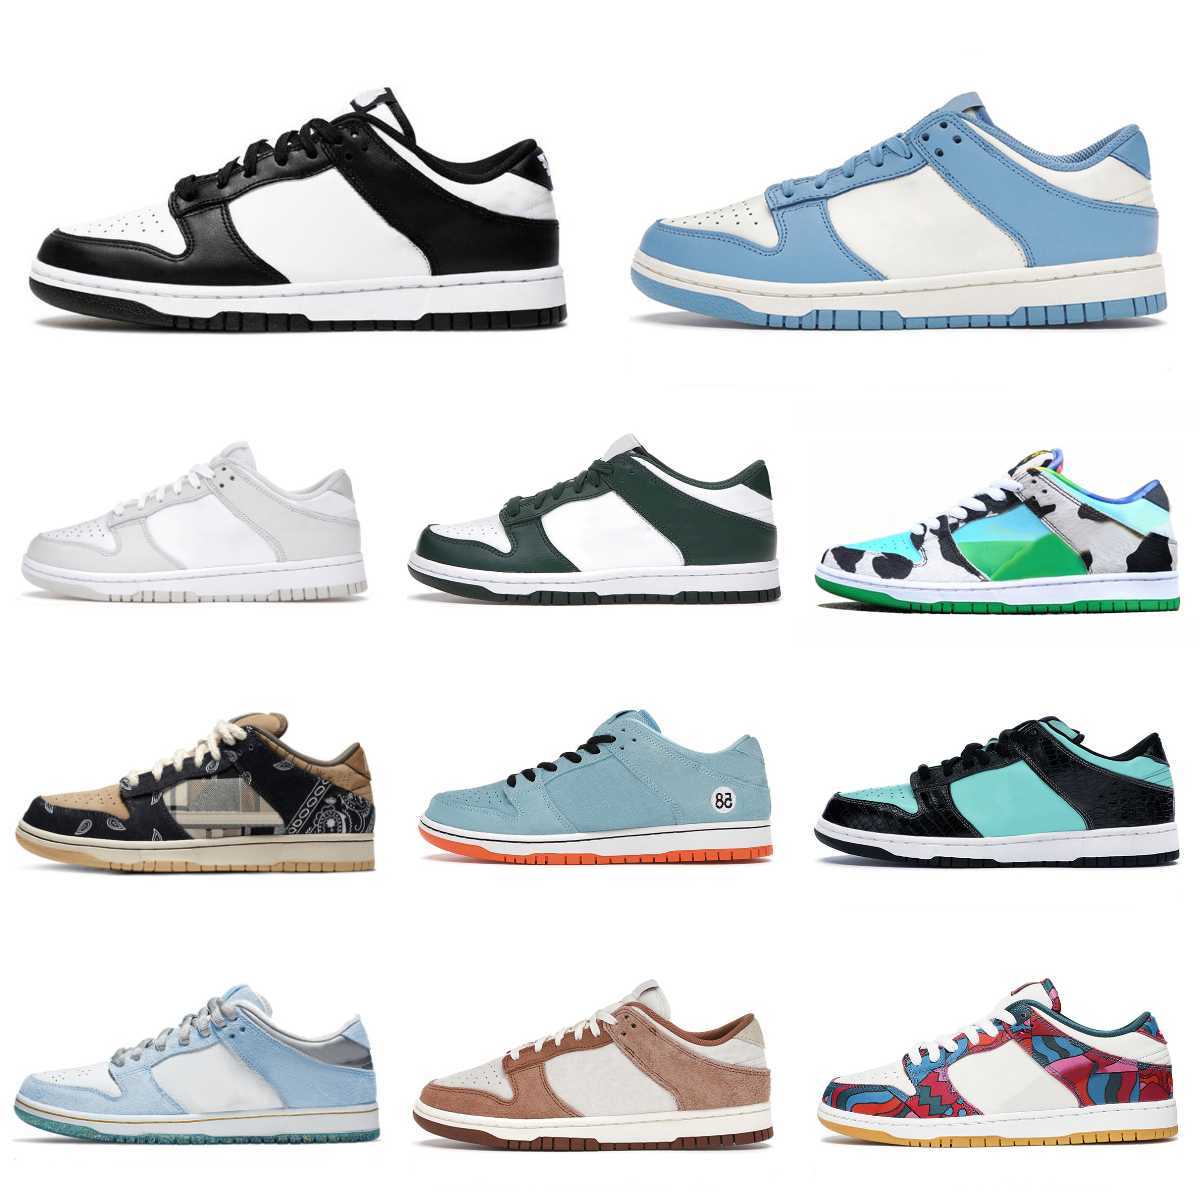 

Designers SB Lows Mens Sports Shoes DuNkS Safari Mix Paisley UNC Bred Black White Chunky Dunky Women Sean Cliver Bart Simpson Green Team Grey Fog Trainer Sneakers SA8, Please contact us